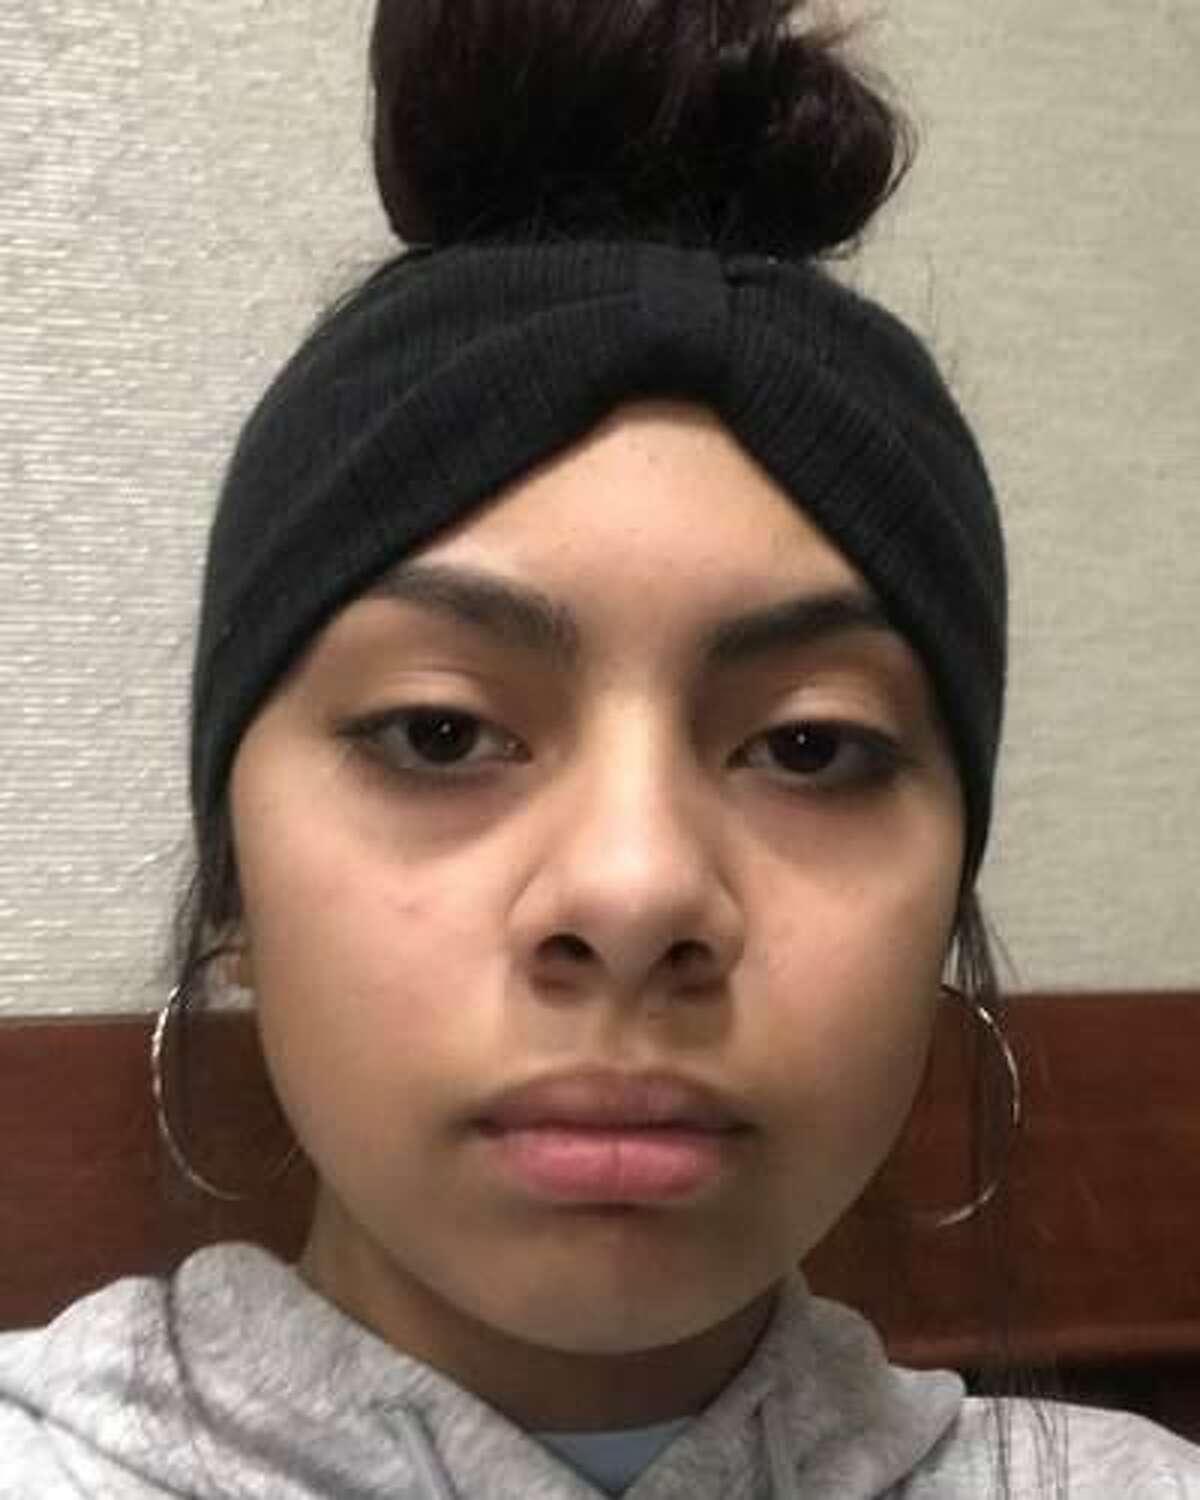 Julissa Delgado was reported missing on June 29, 2020, from the 5900 block of Fairgreen Street, according to a San Antonio police report.